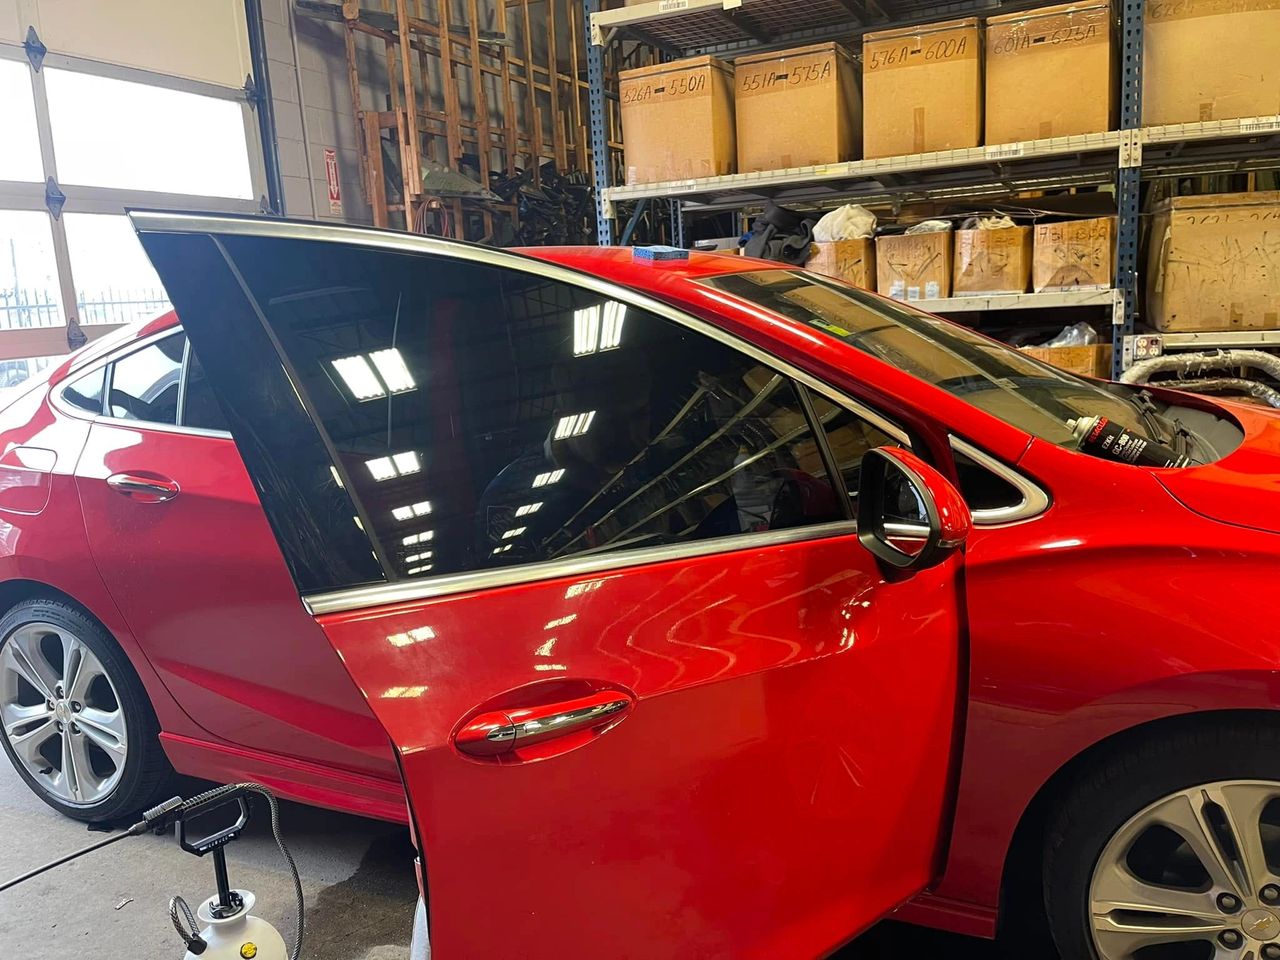 California Window Tint Laws to Know for Your Car